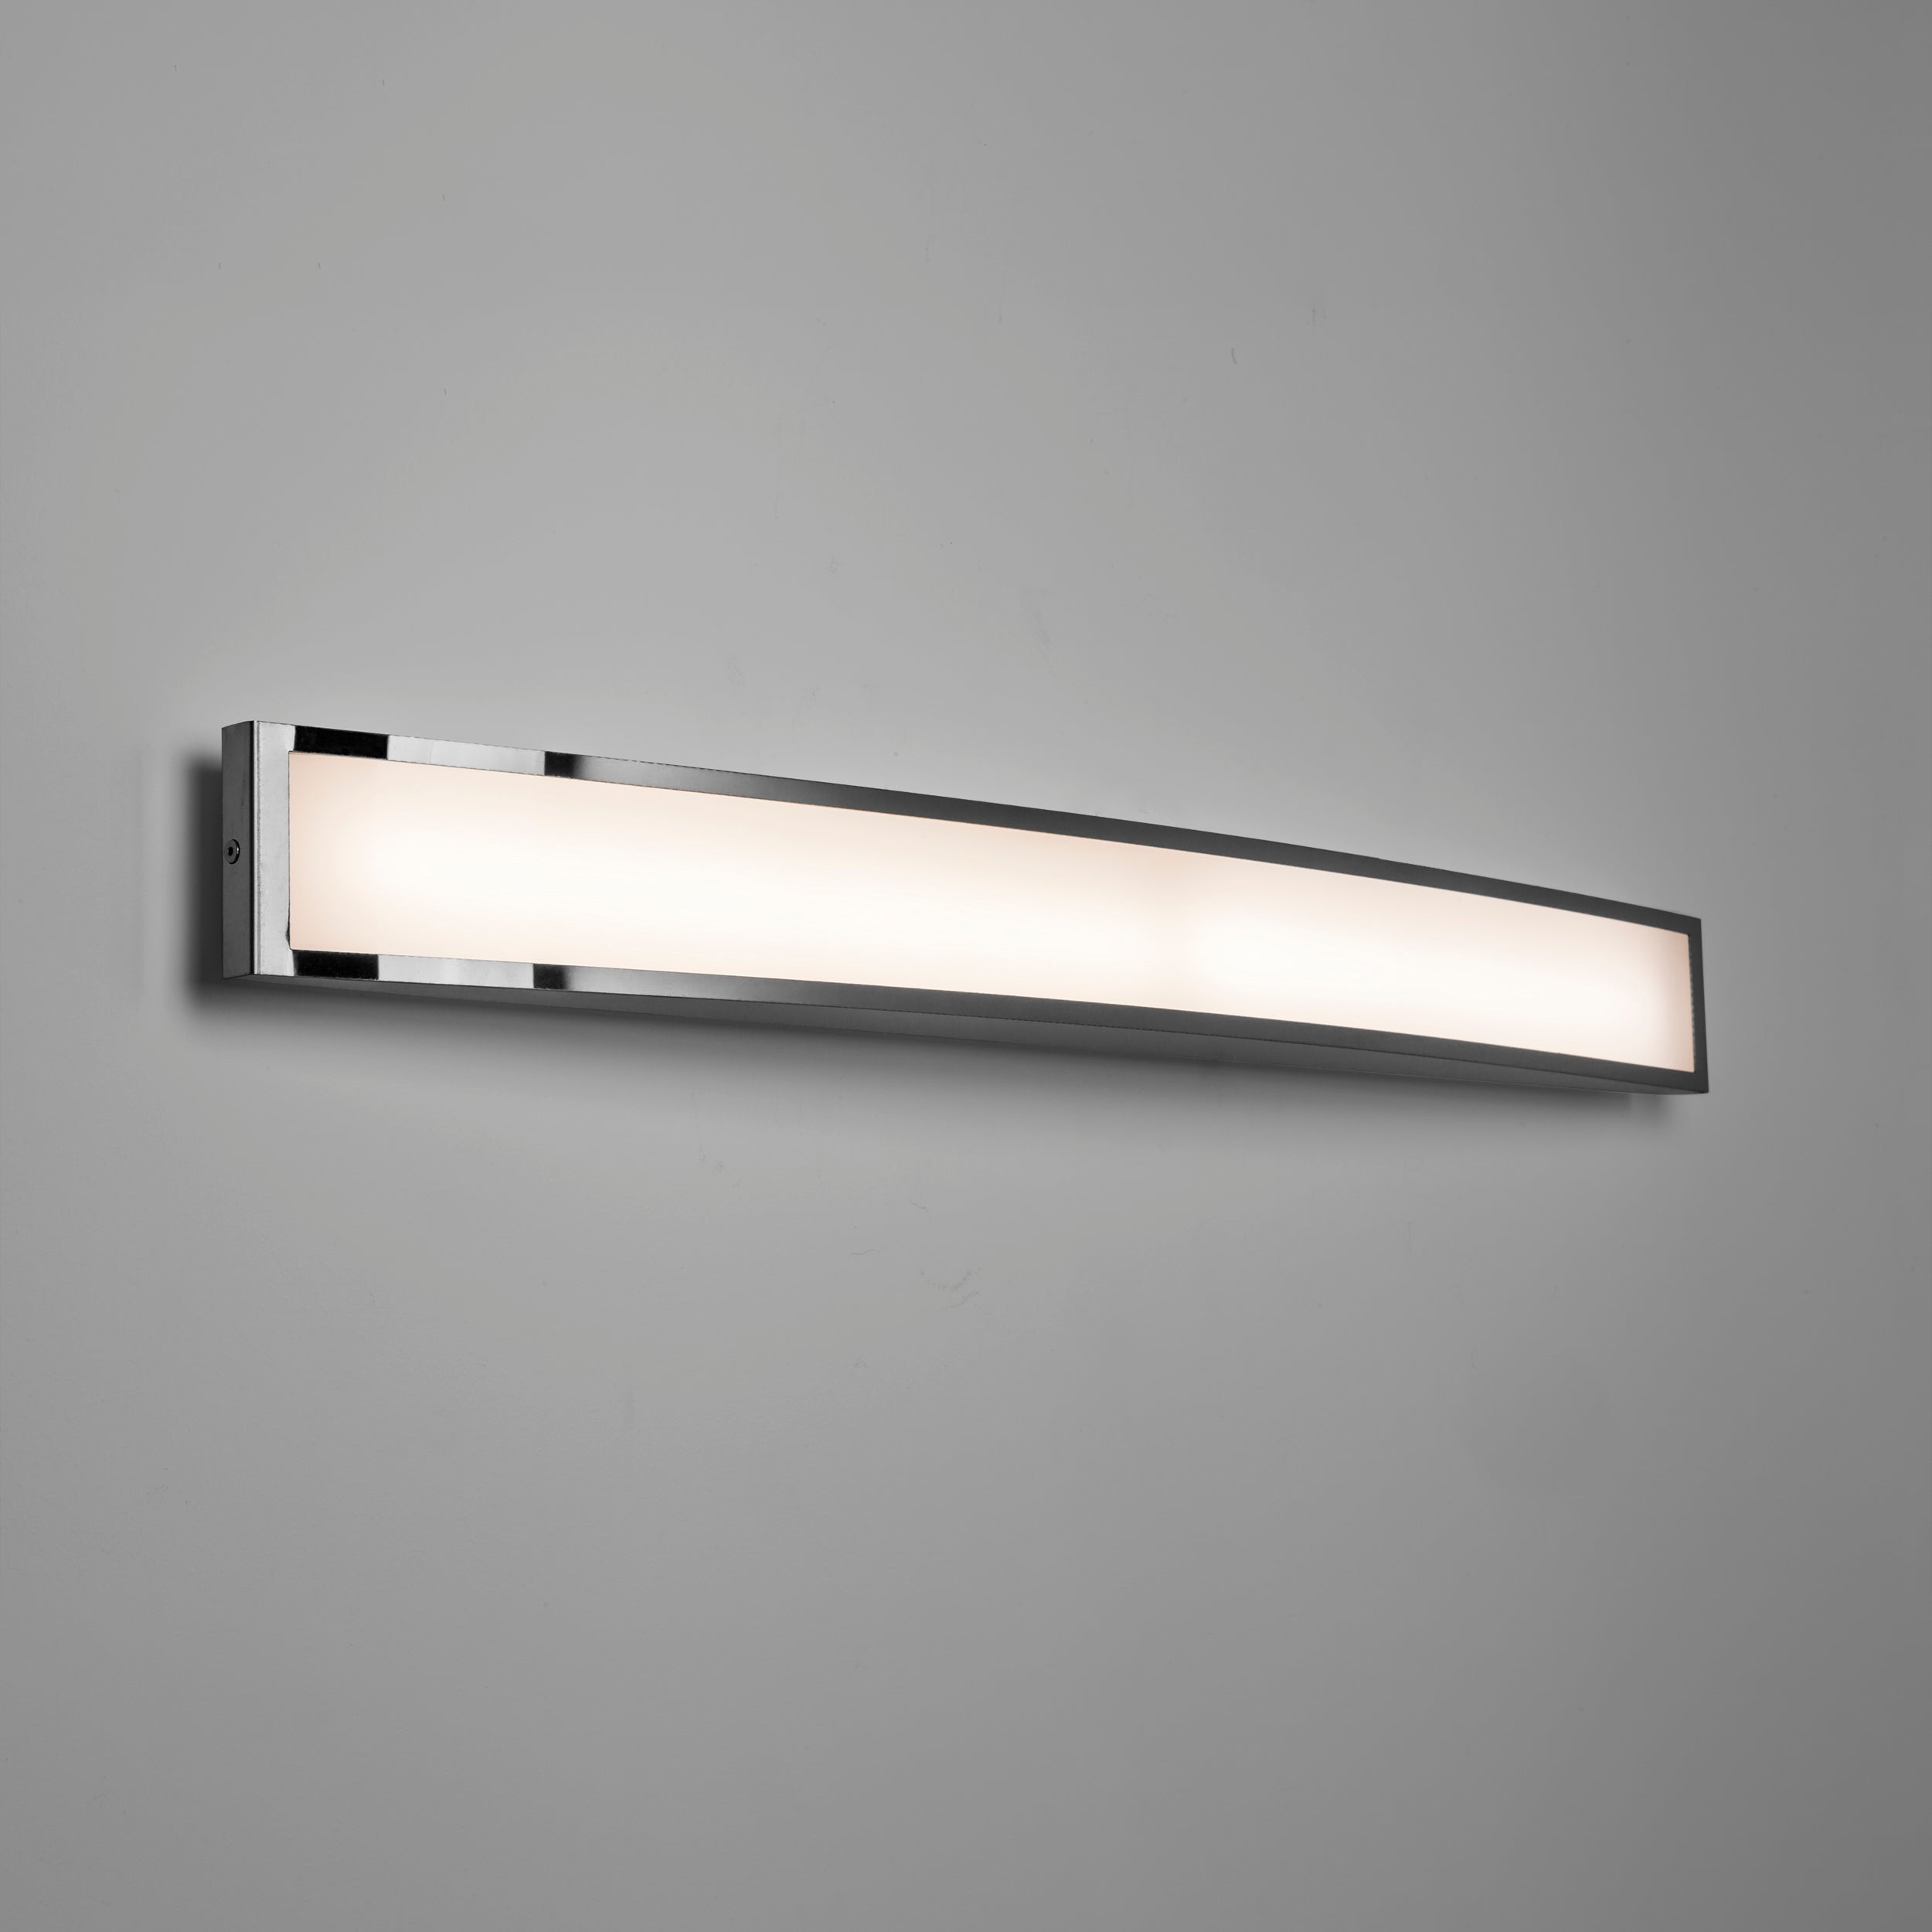 Astro Lighting Chord Wall Light Fixtures Astro Lighting 2.56x25.2x2.56 Polished Chrome Yes (Integral), Mid-Power LED